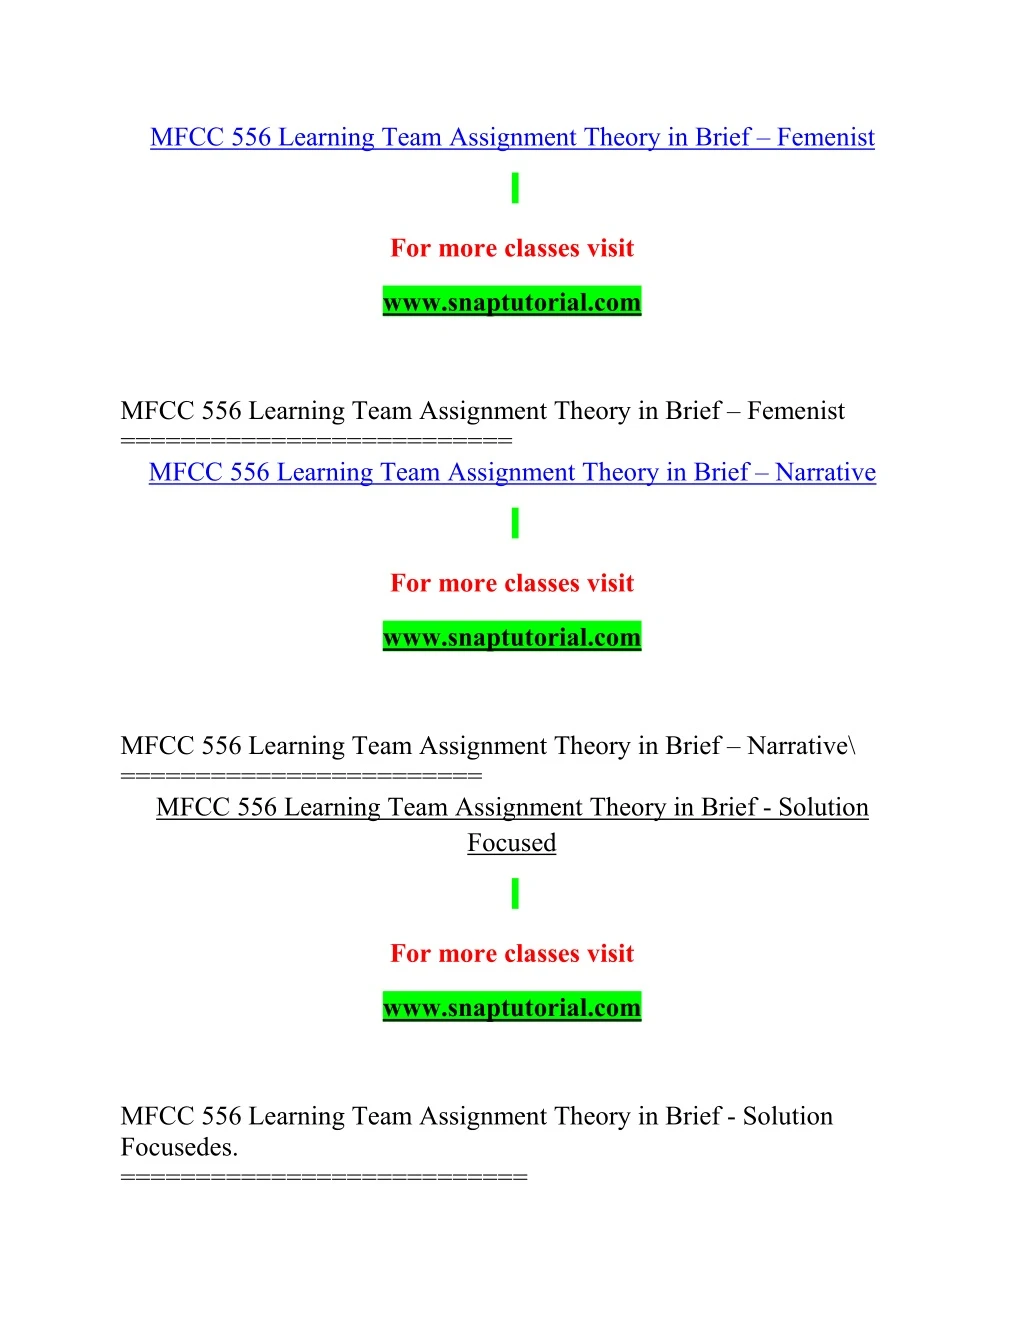 mfcc 556 learning team assignment theory in brief